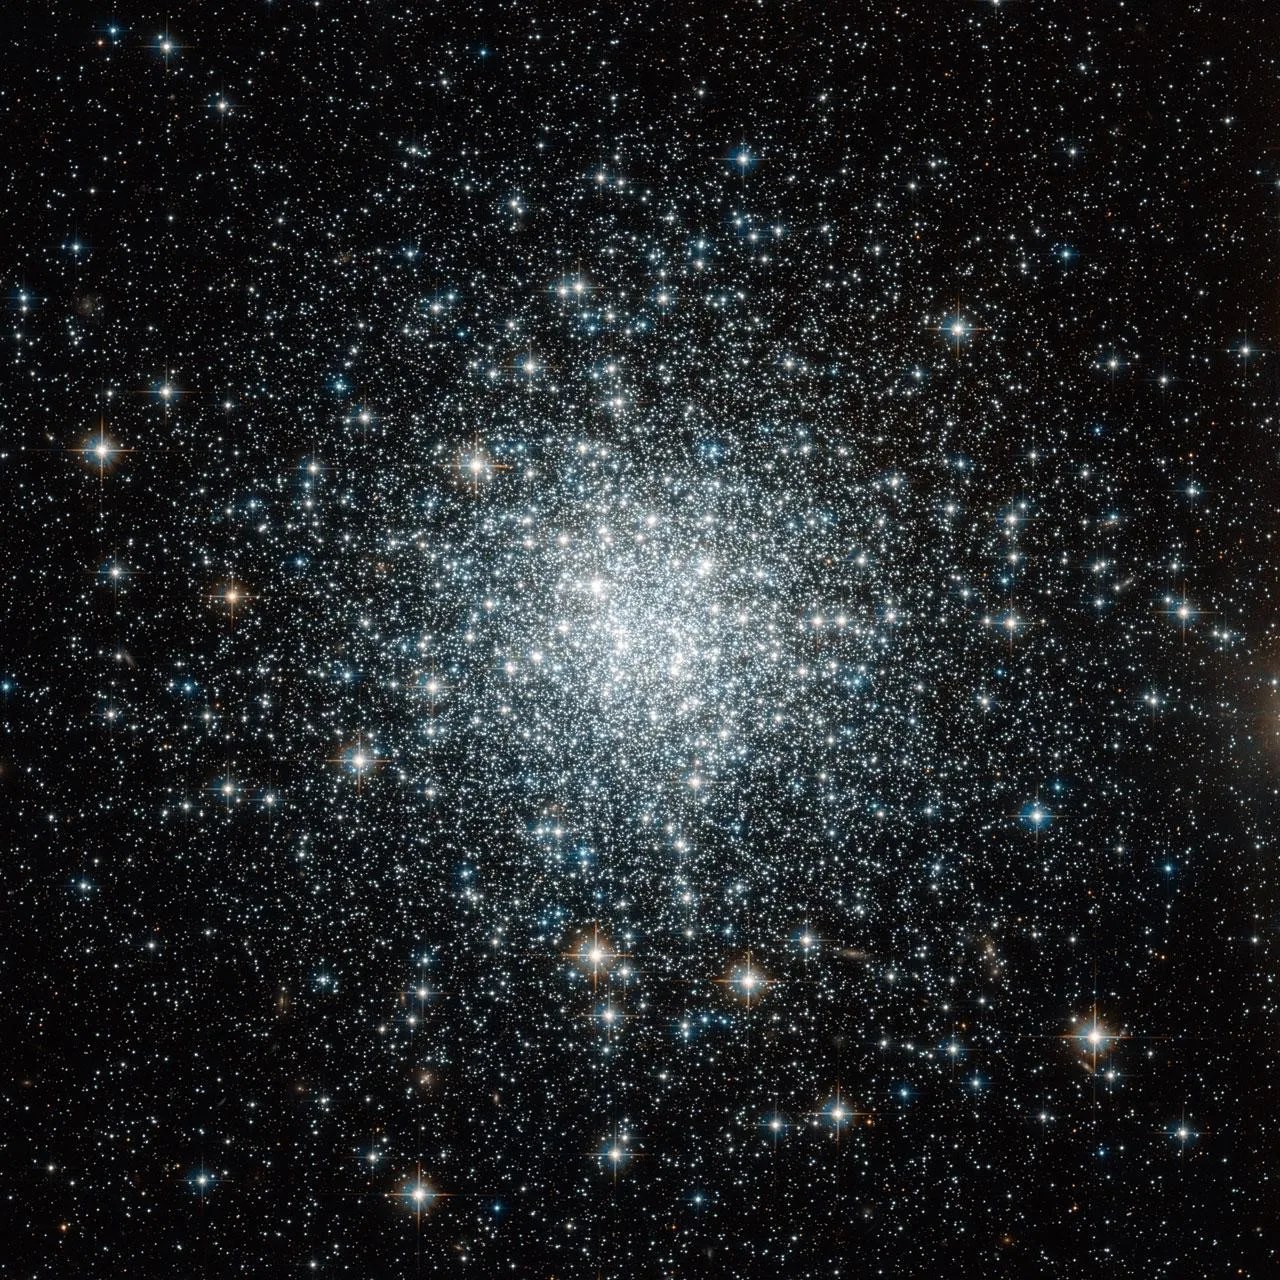 This is a globular cluster, a sphere of tens of thousands of stars. Most of them are a whitish color, and more concentrated in the center of the sphere. As you move farther from the center, there are fewer stars.